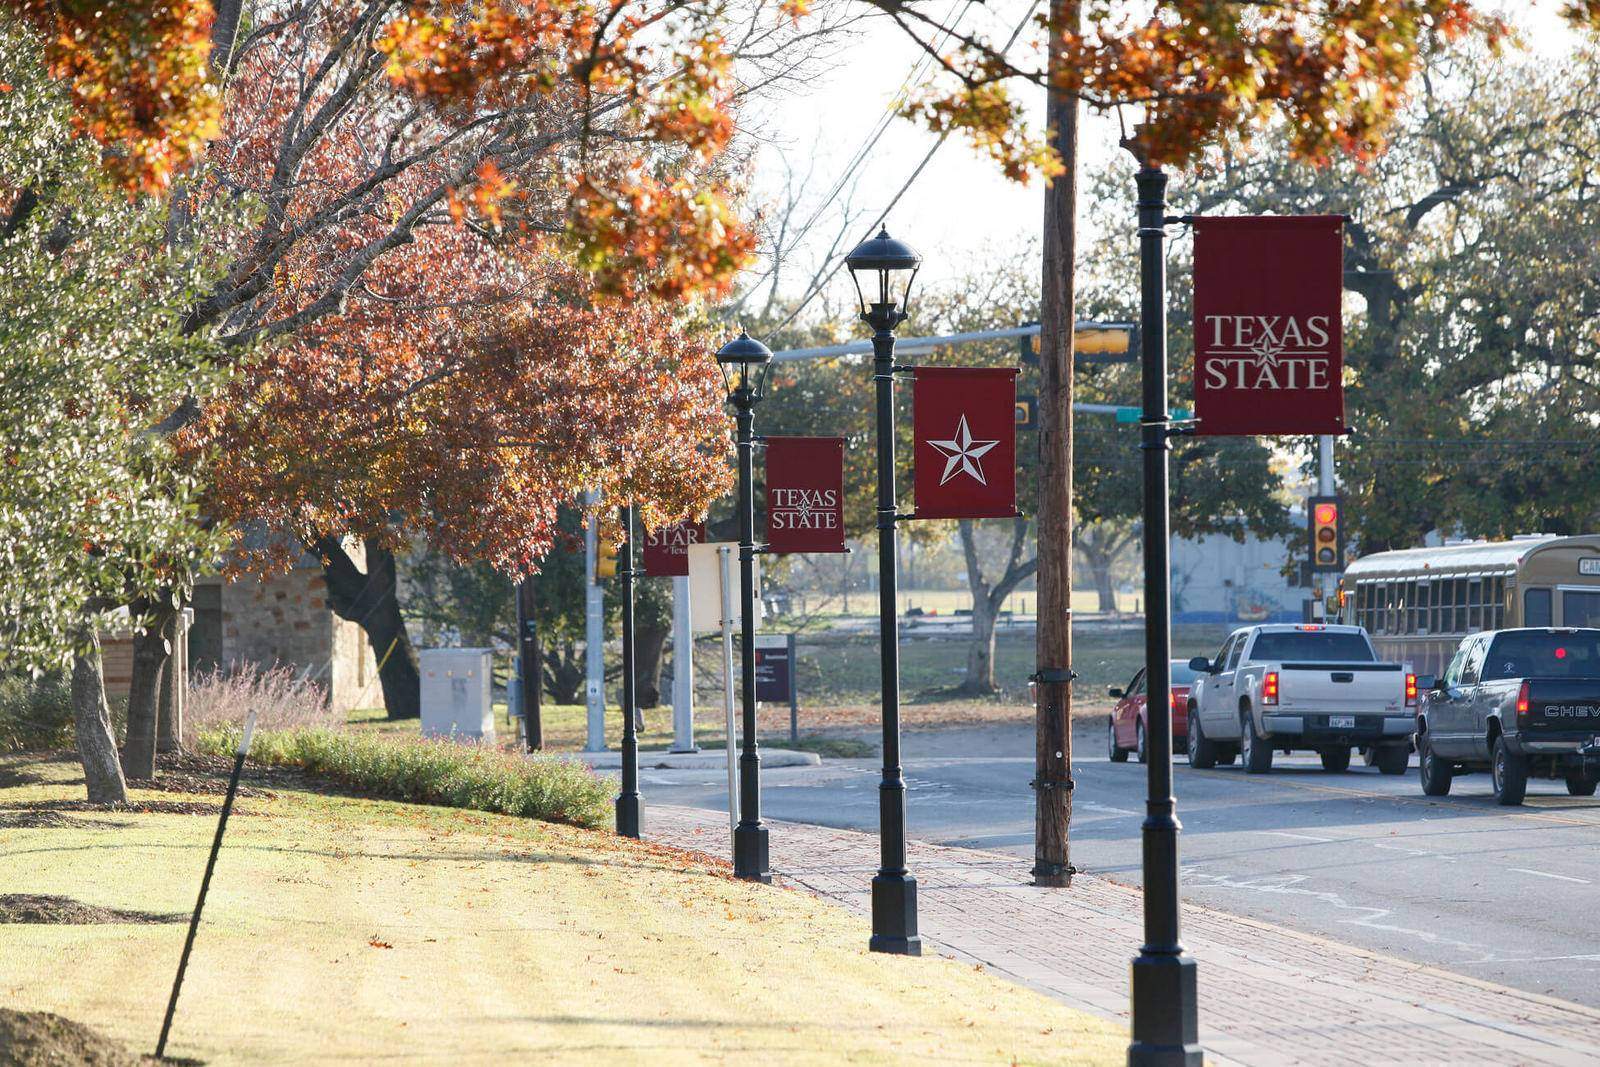 Flags with Texas State logo